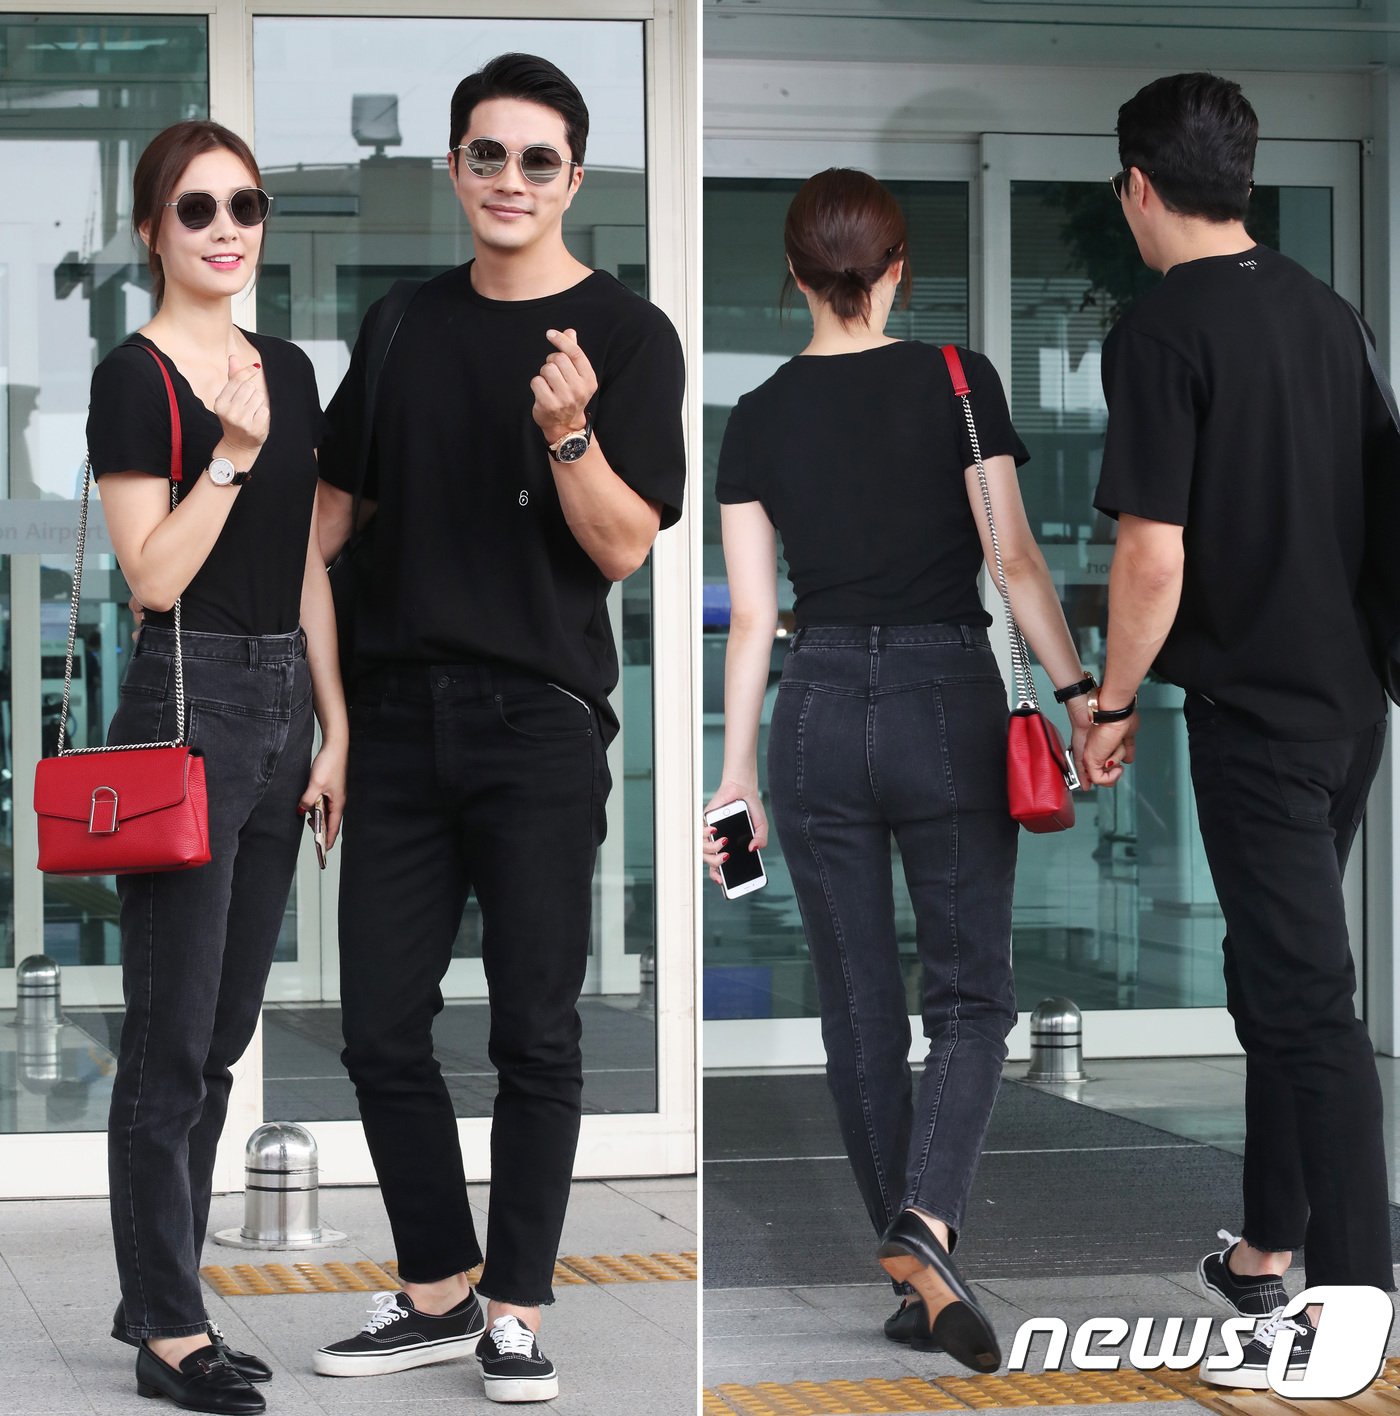 The pair wore a black couple as the entertainment industrys leading encore couple, Son Tae-young wearing a T-shirt and black jeans with a black V-neckline.Here, I matched the red bag and gave a point to the costume that could seem flat.Kwon Sang-woo completed a comfortable yet stylish airport fashion by wearing sneakers with white in black costumes.In particular, the two completed a loving couple look with sunglasses, watches and costume tones.